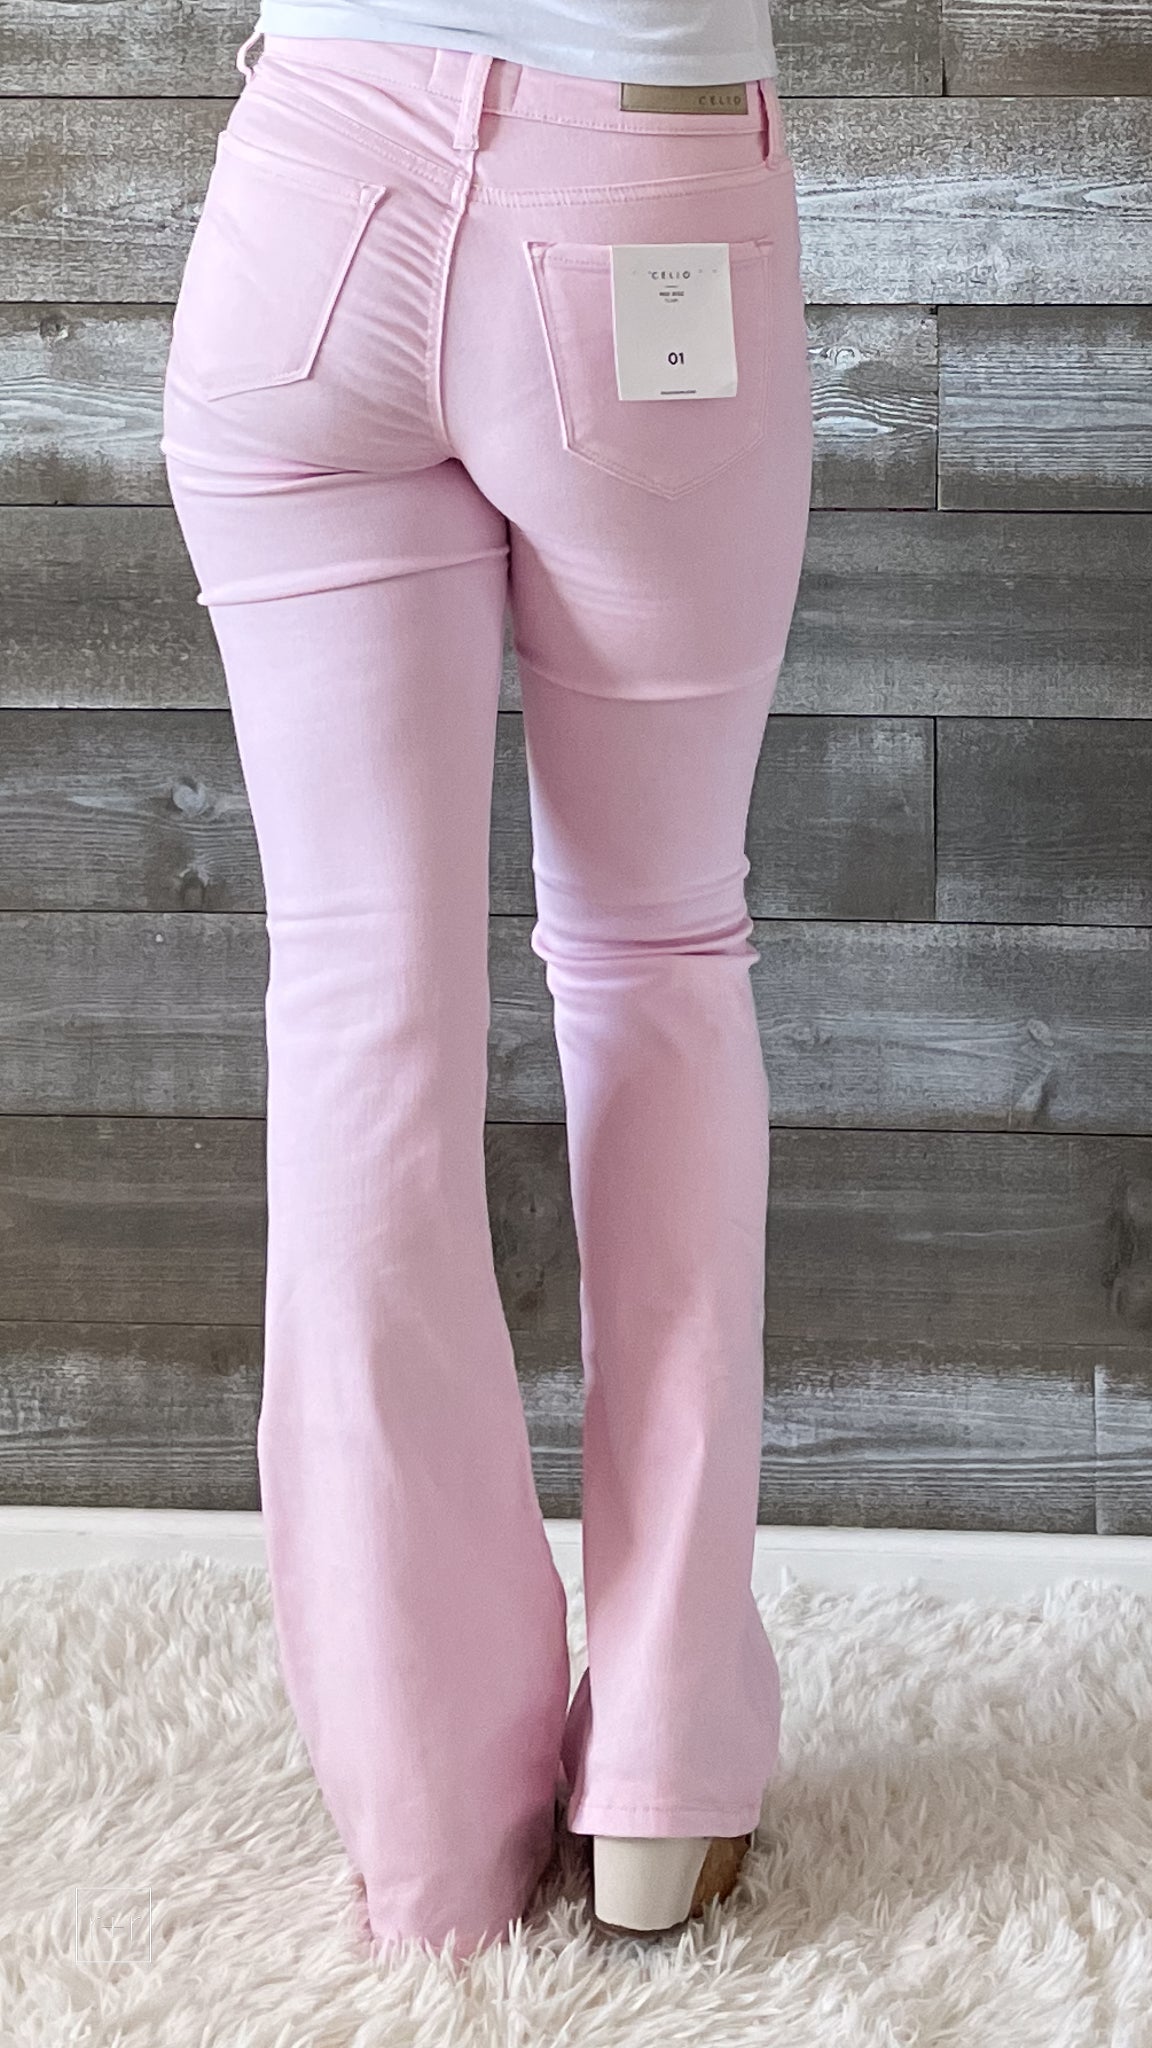 cello jeans strawberry cream mid rise flare jeans clean finished hem WV39229STC